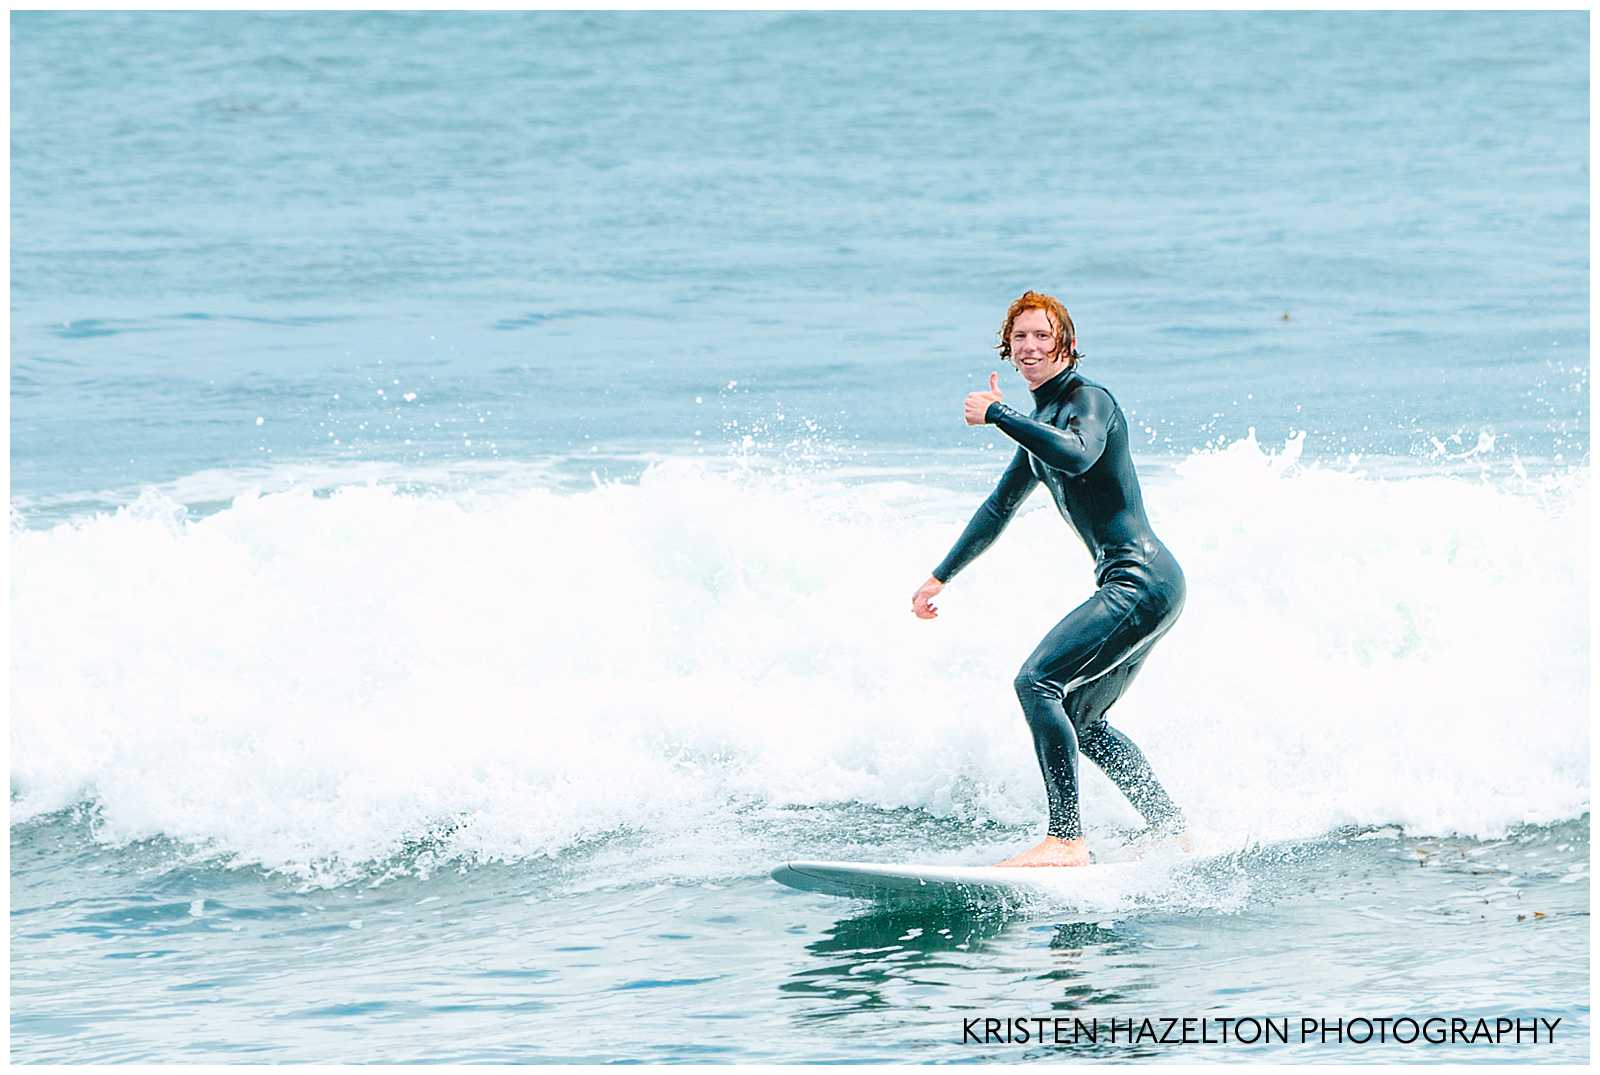 Red haired man surfing and giving thumbs up Surfing photography by Kristen Hazelton. 